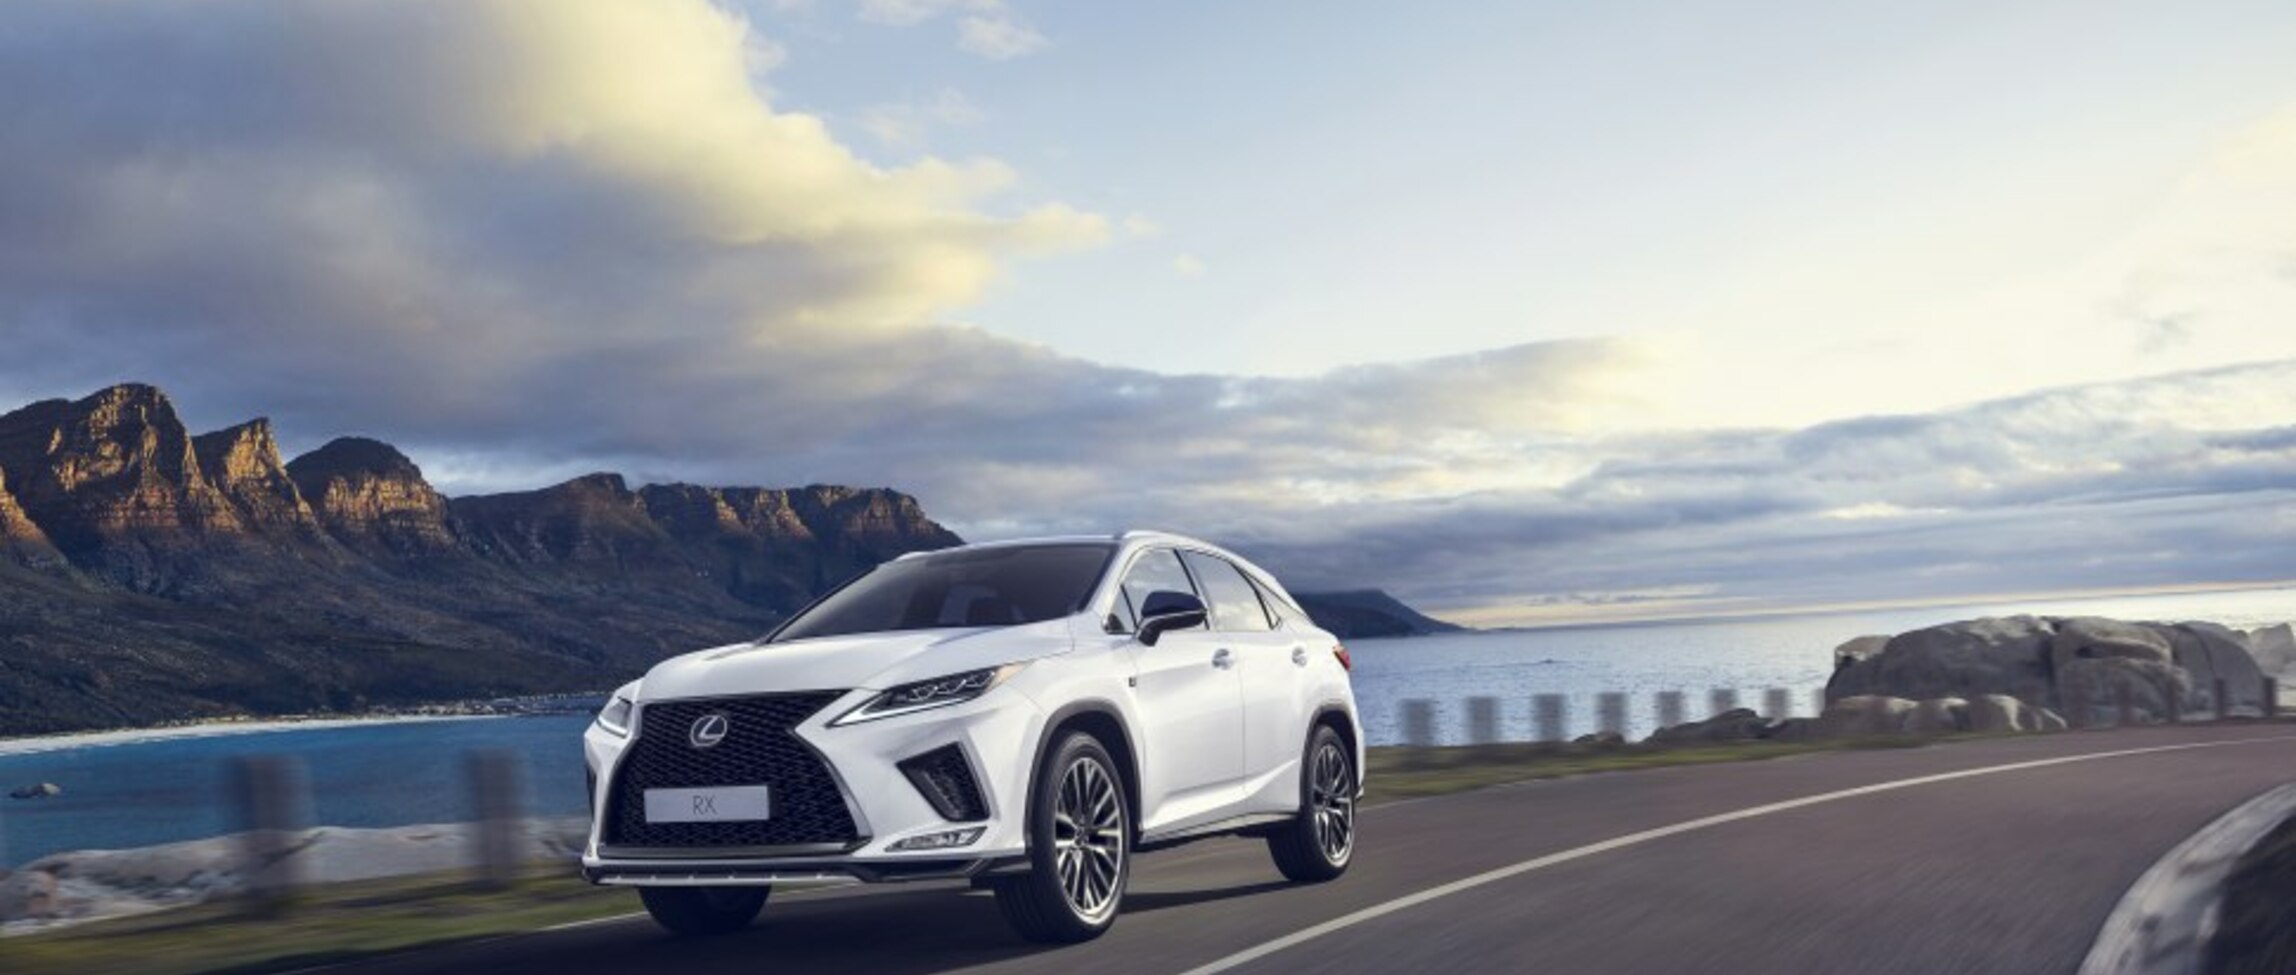 Lexus RX IV (facelift 2019) 450h V6 (308 Hp) AWD Automatic 2019, 2020, 2021 